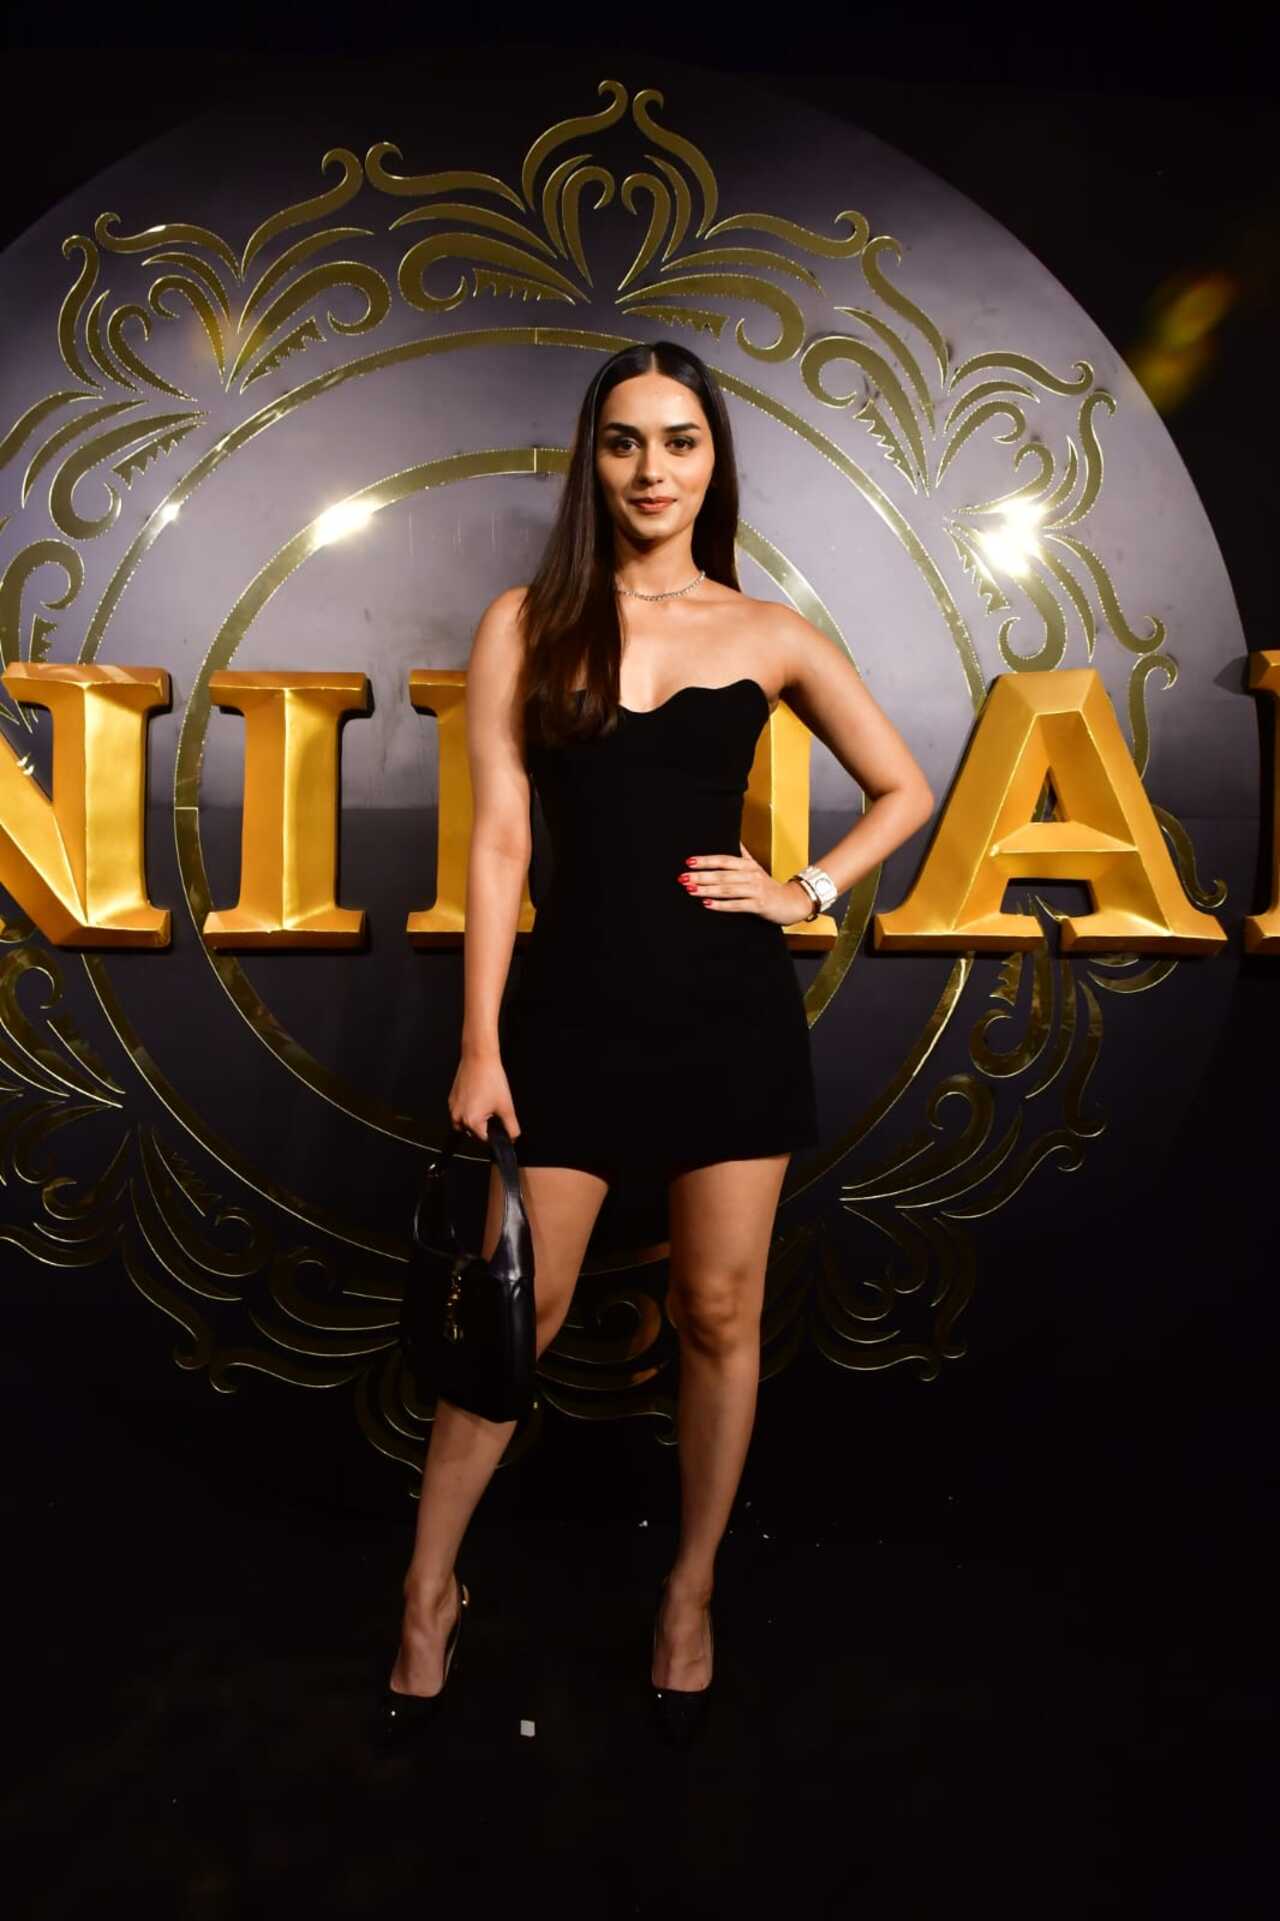 Manushi Chhillar graced the party in a little black dress